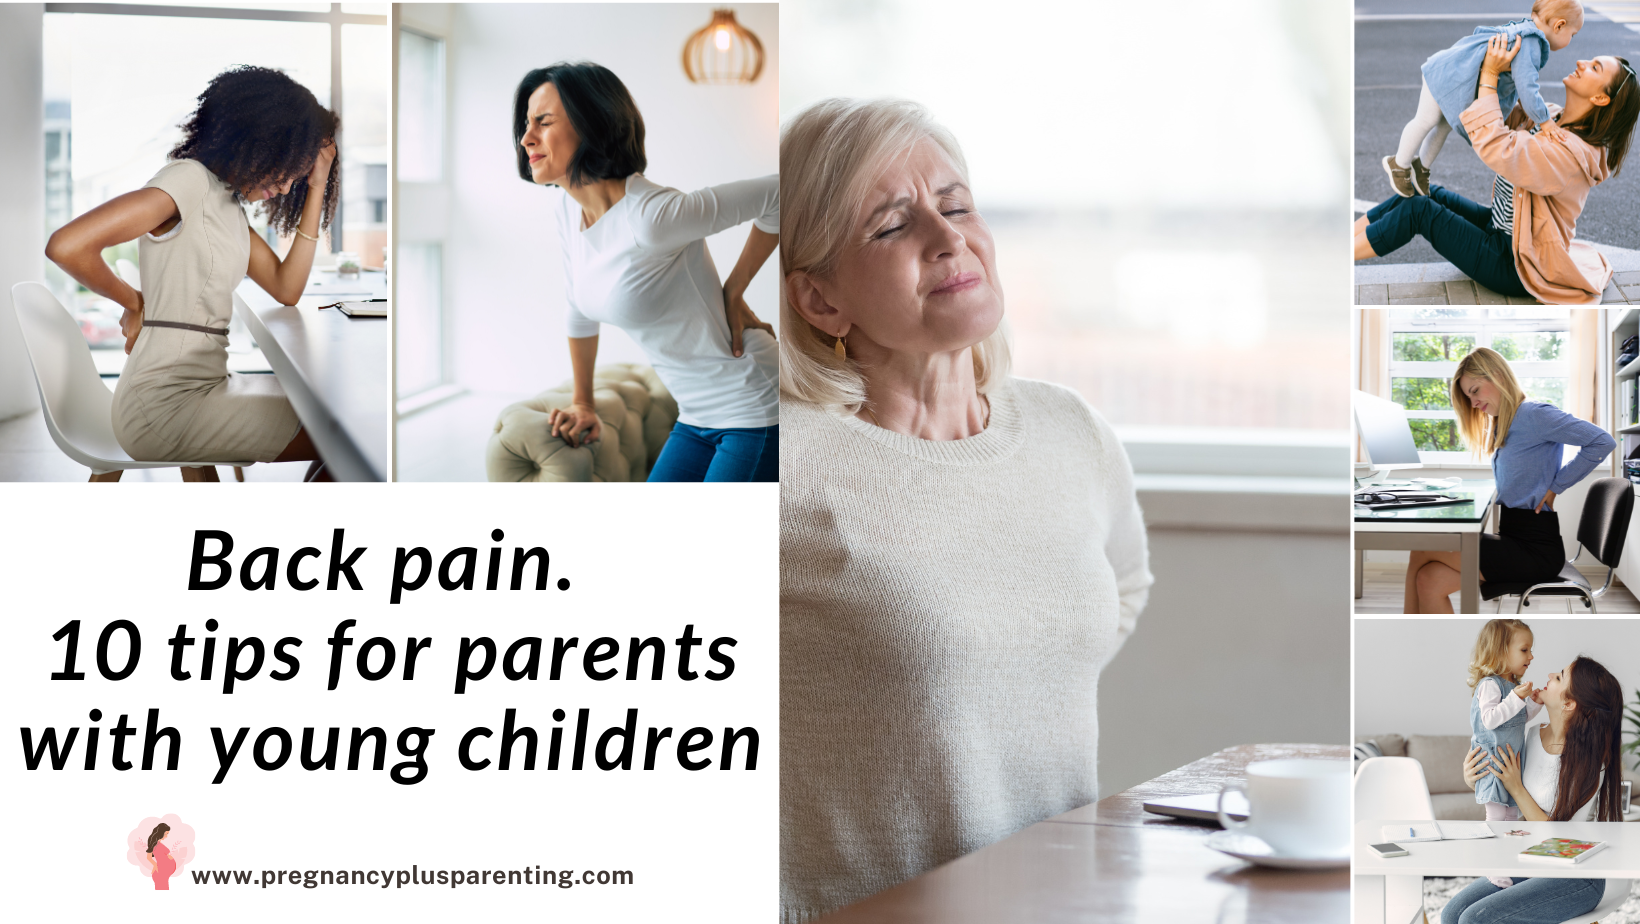 Back pain. 10 tips for parents with young children